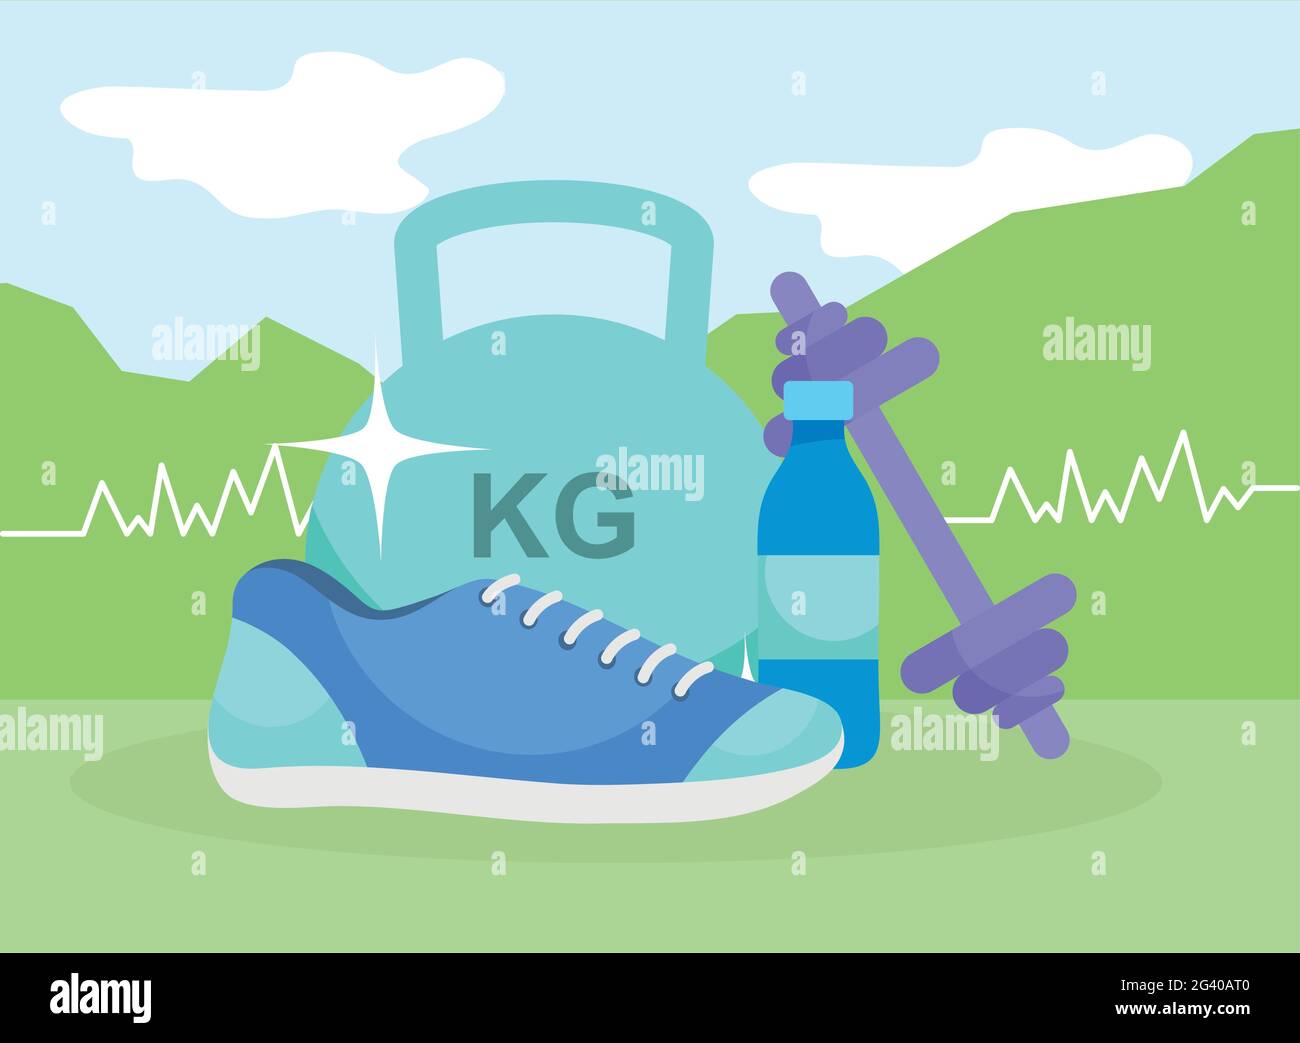 Fitness weights shoe and bottle Stock Vector